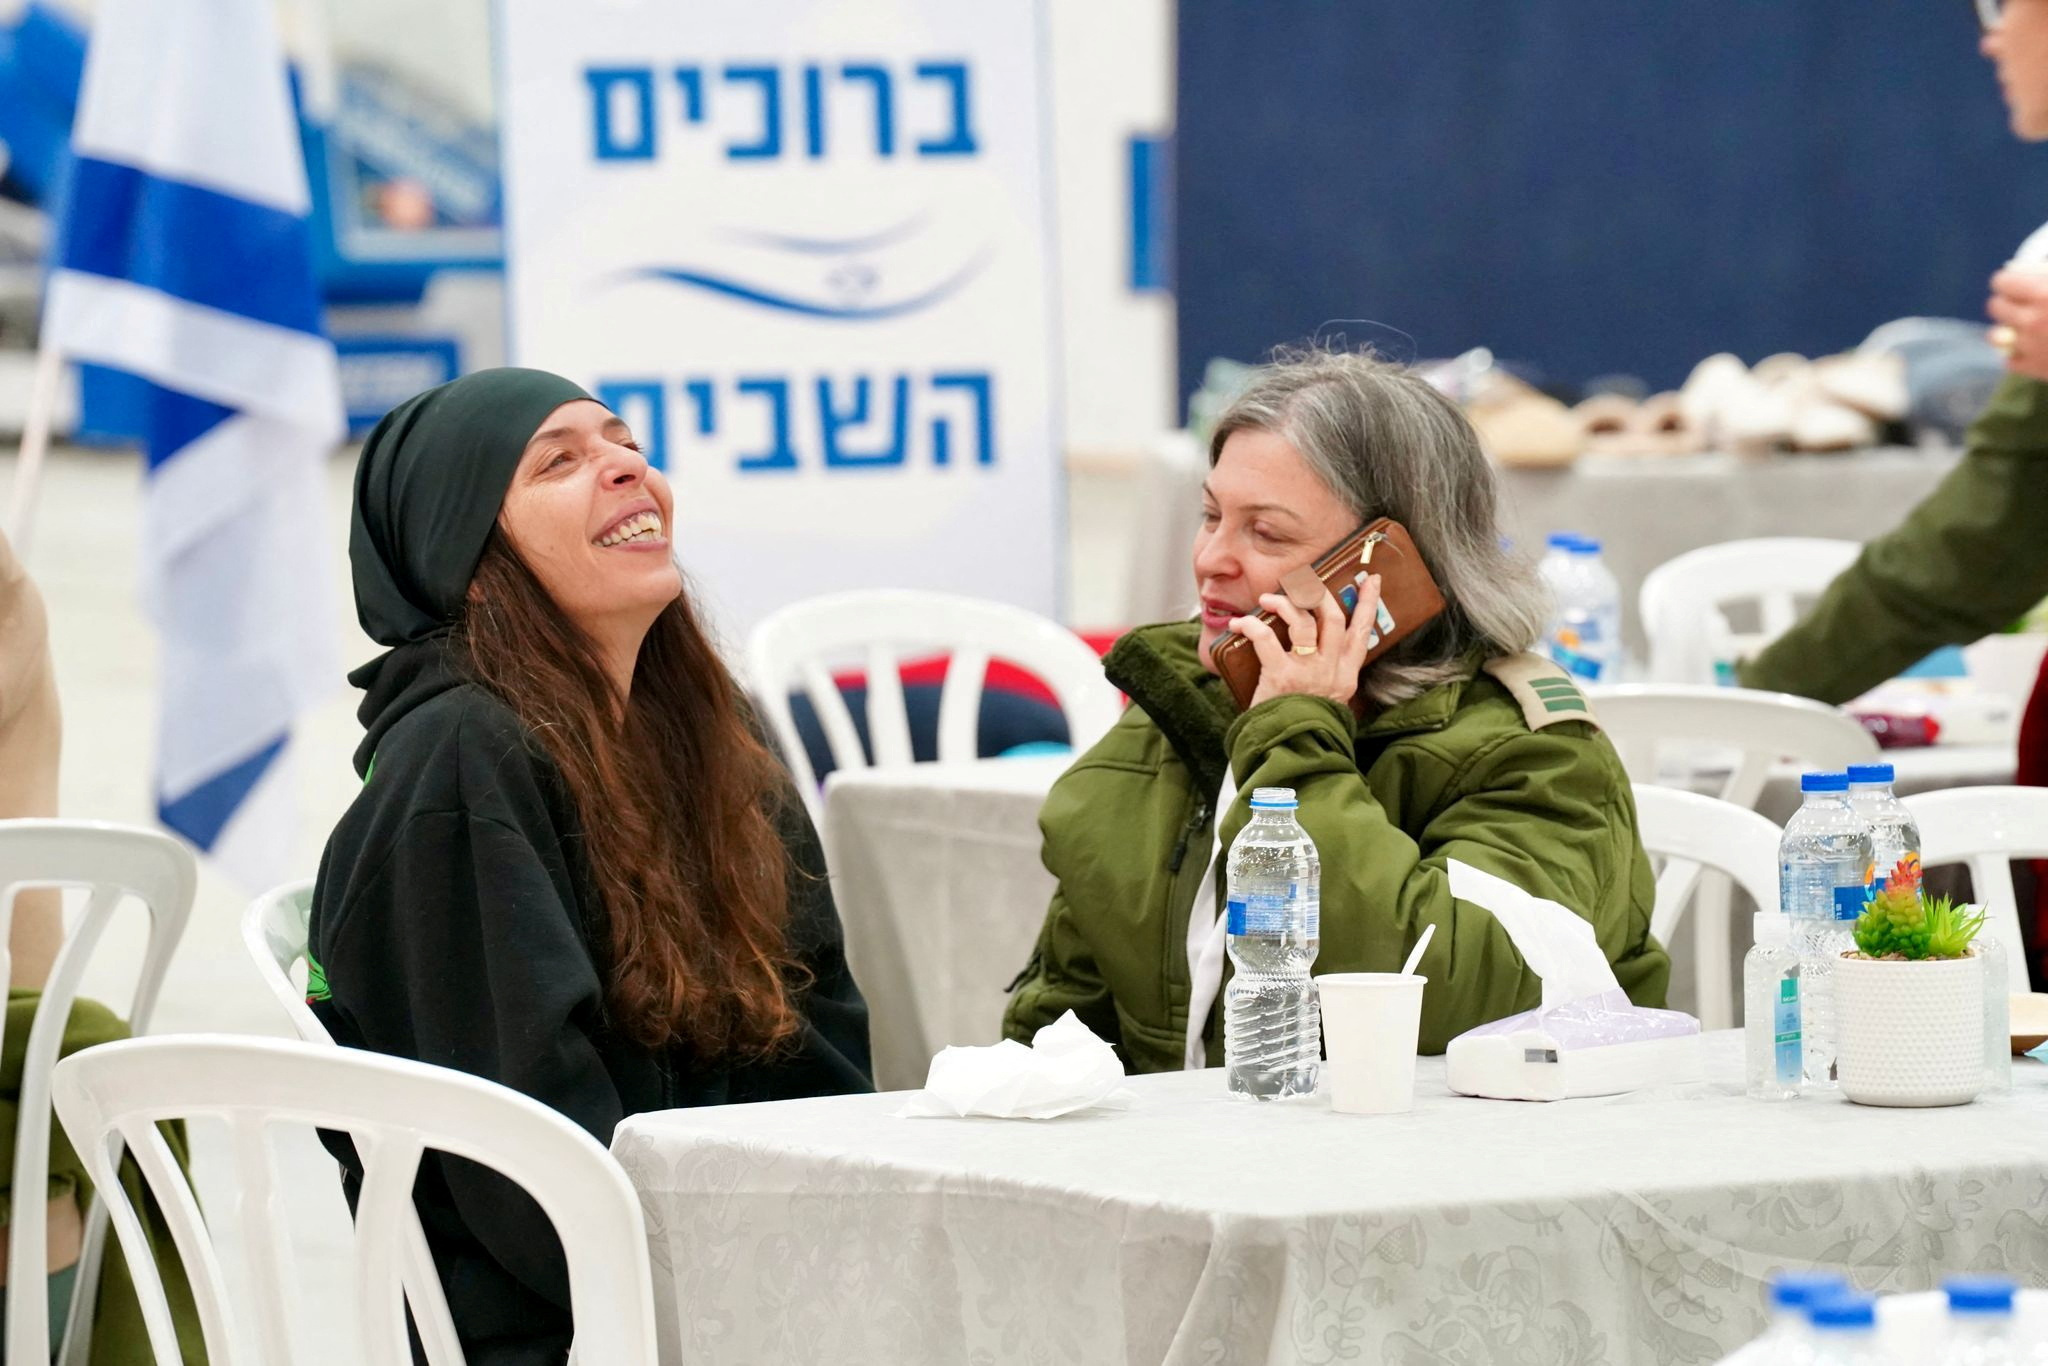 Former hostage released from the Gaza Strip on November 29 reunites with loved ones in Israel